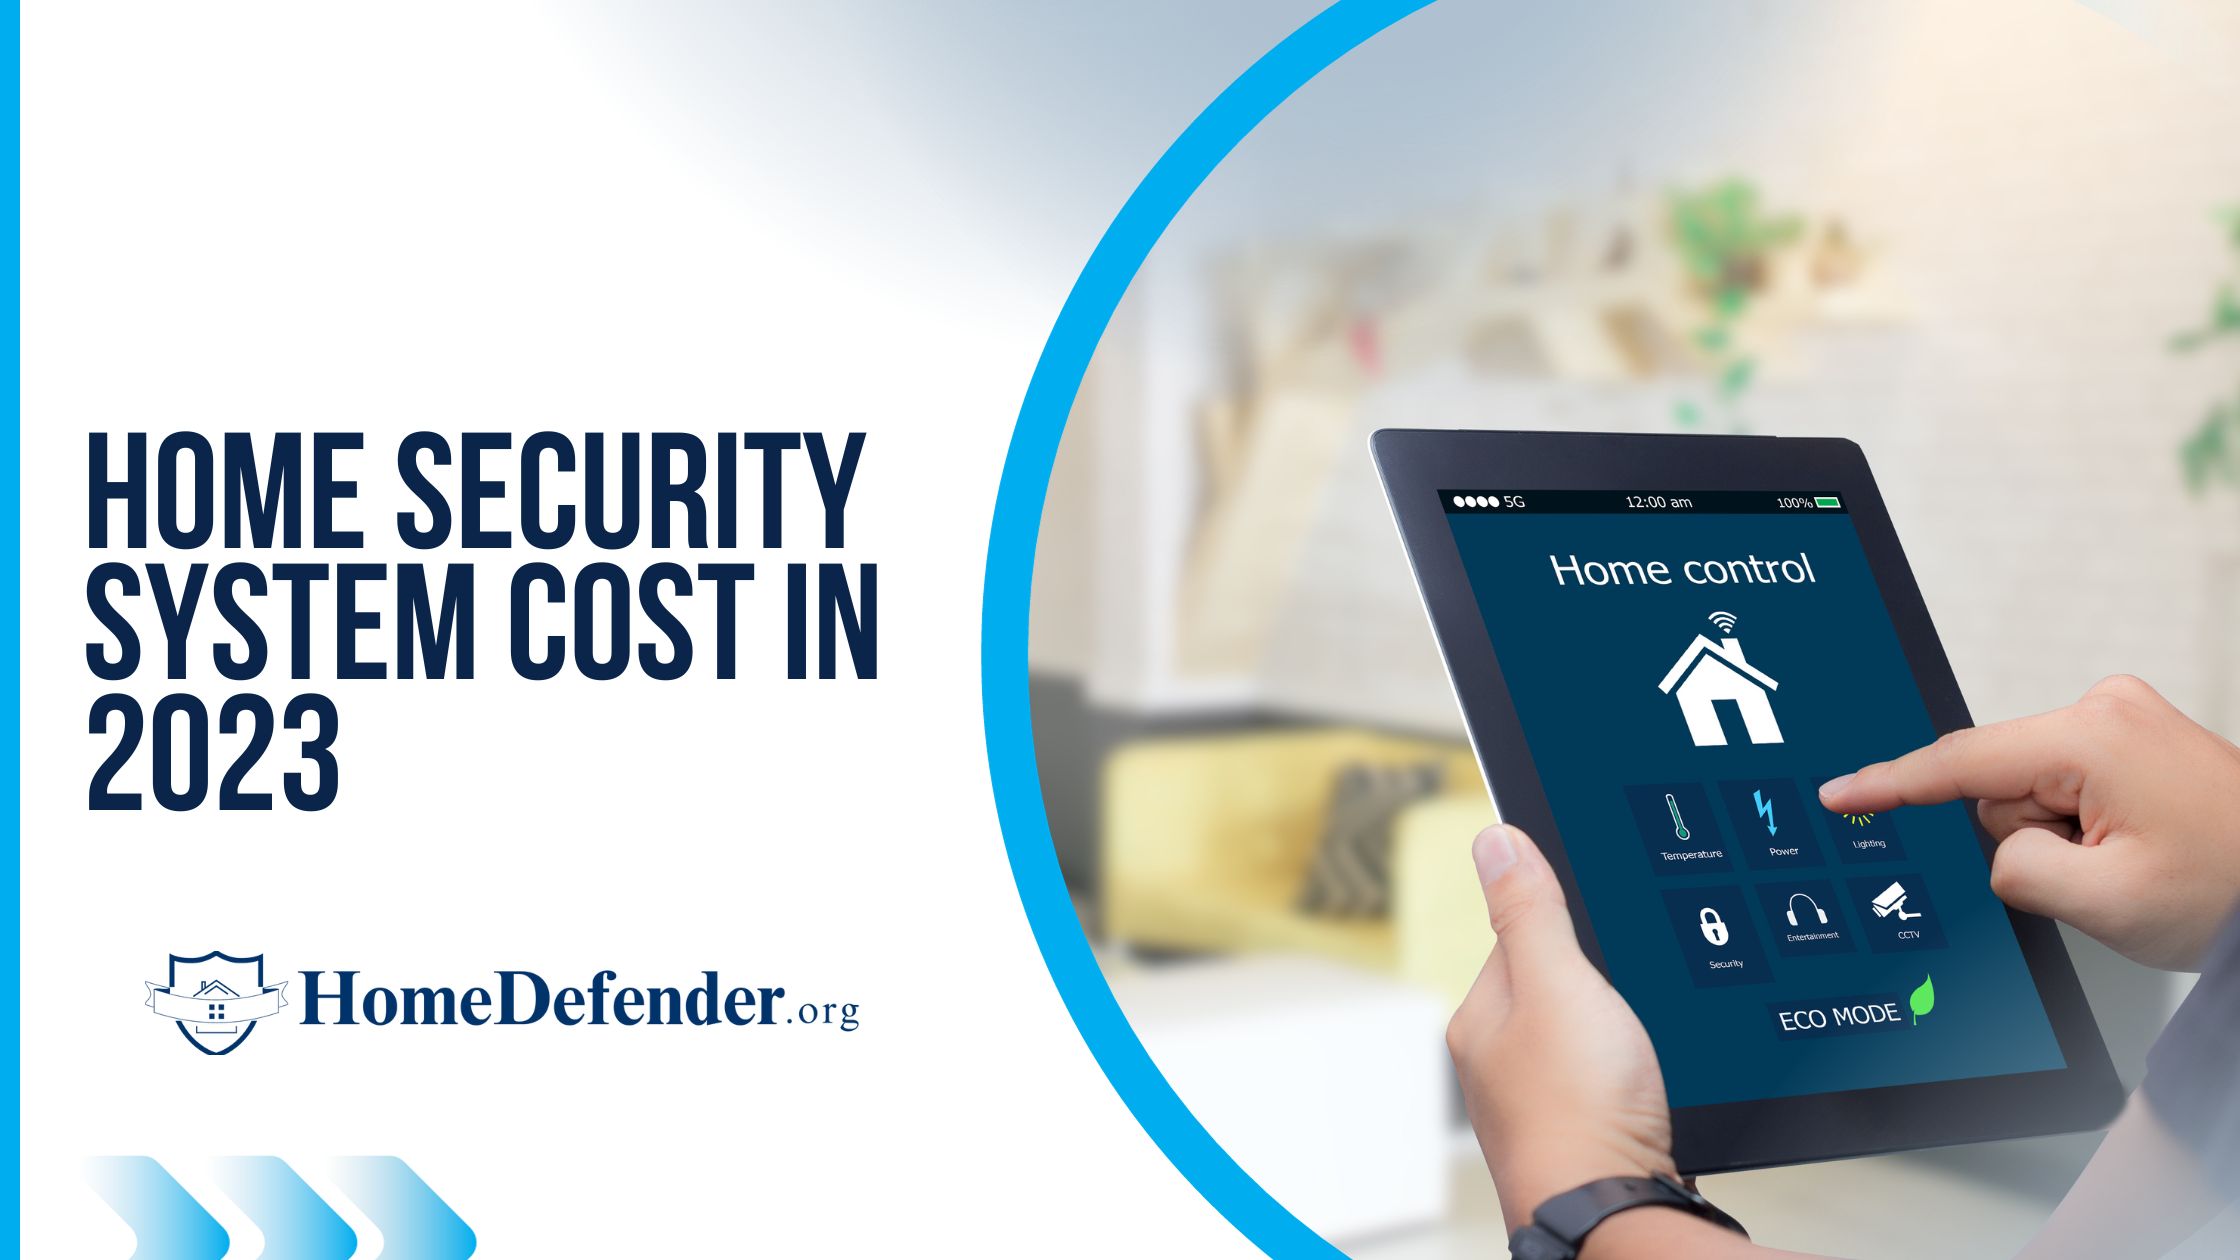 Home Security System Cost in 2023